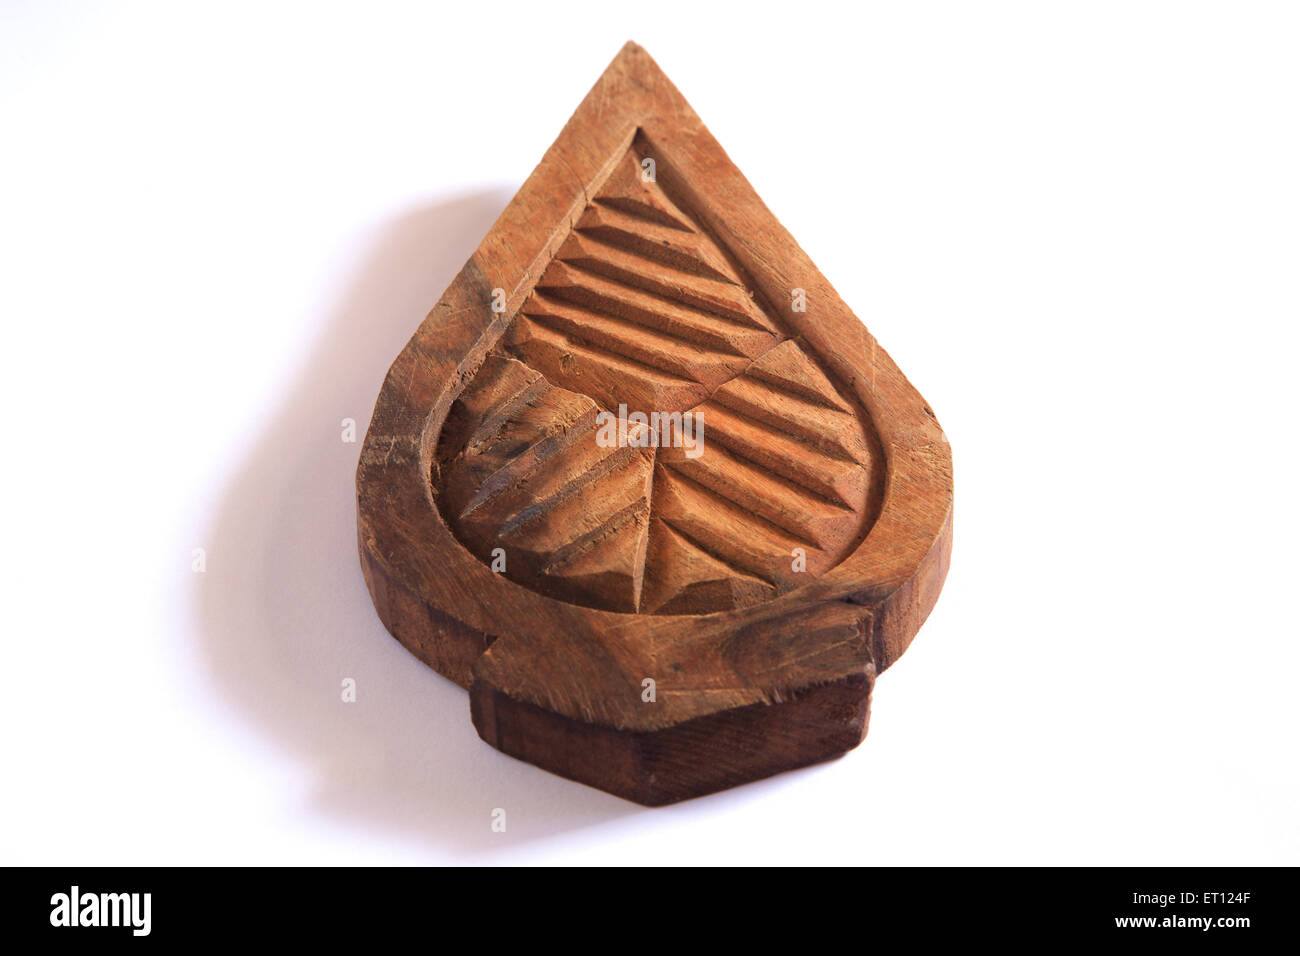 Wooden mould use of stamping and printing ; India Stock Photo